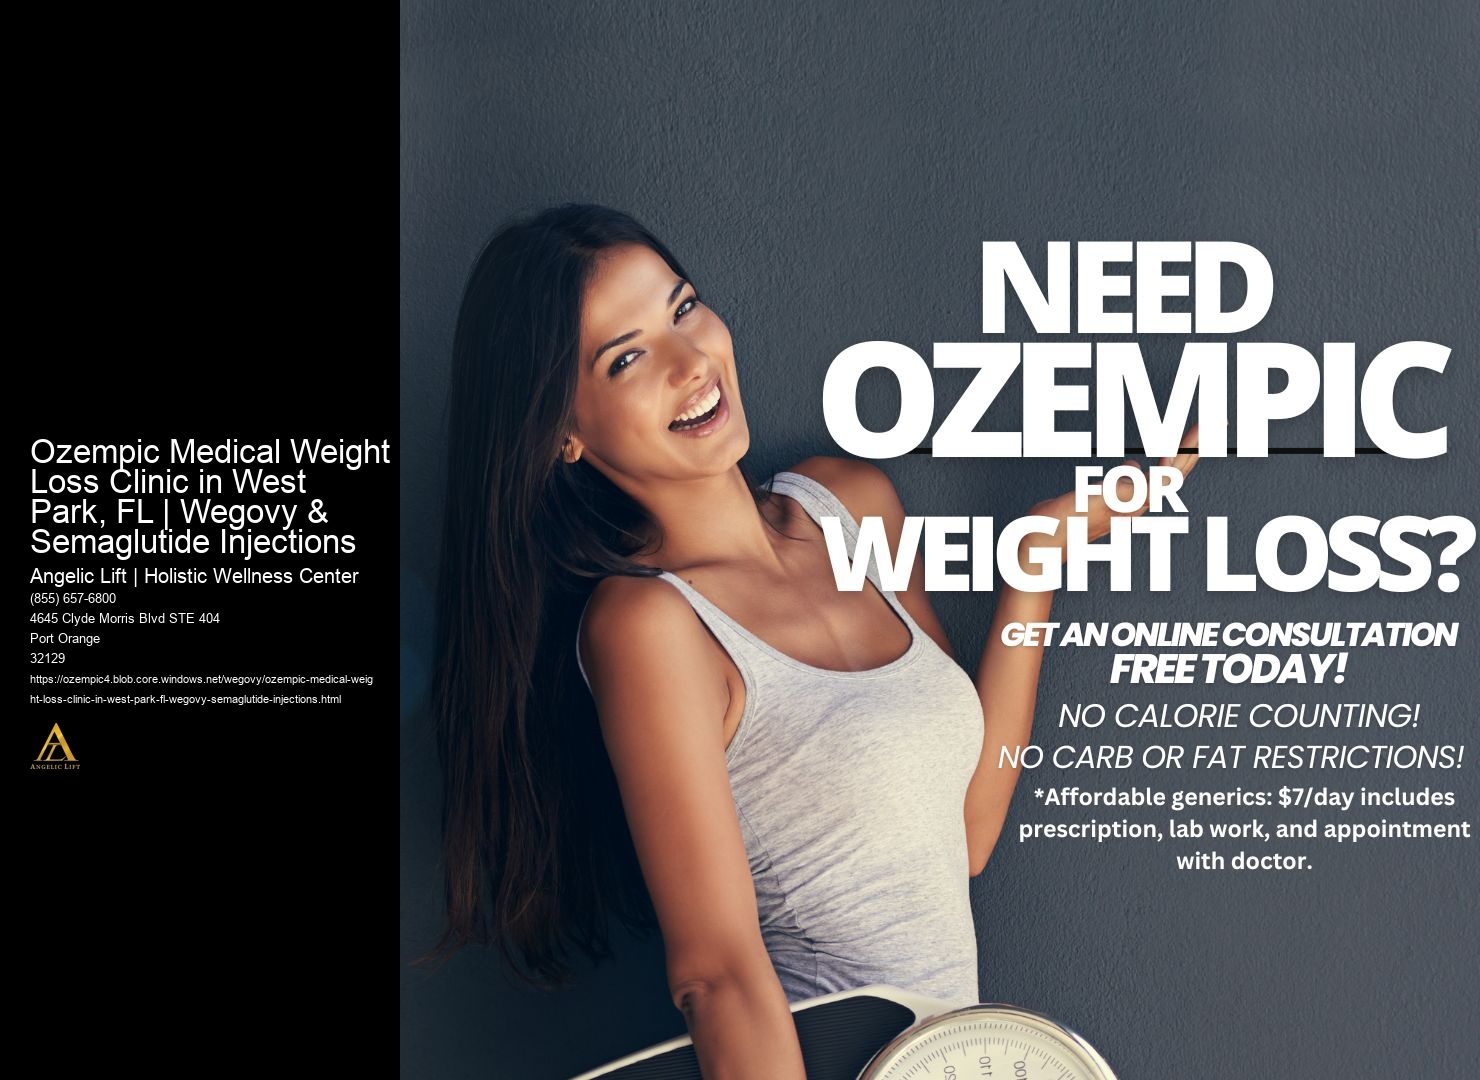 Ozempic Medical Weight Loss Clinic in West Park, FL | Wegovy & Semaglutide Injections